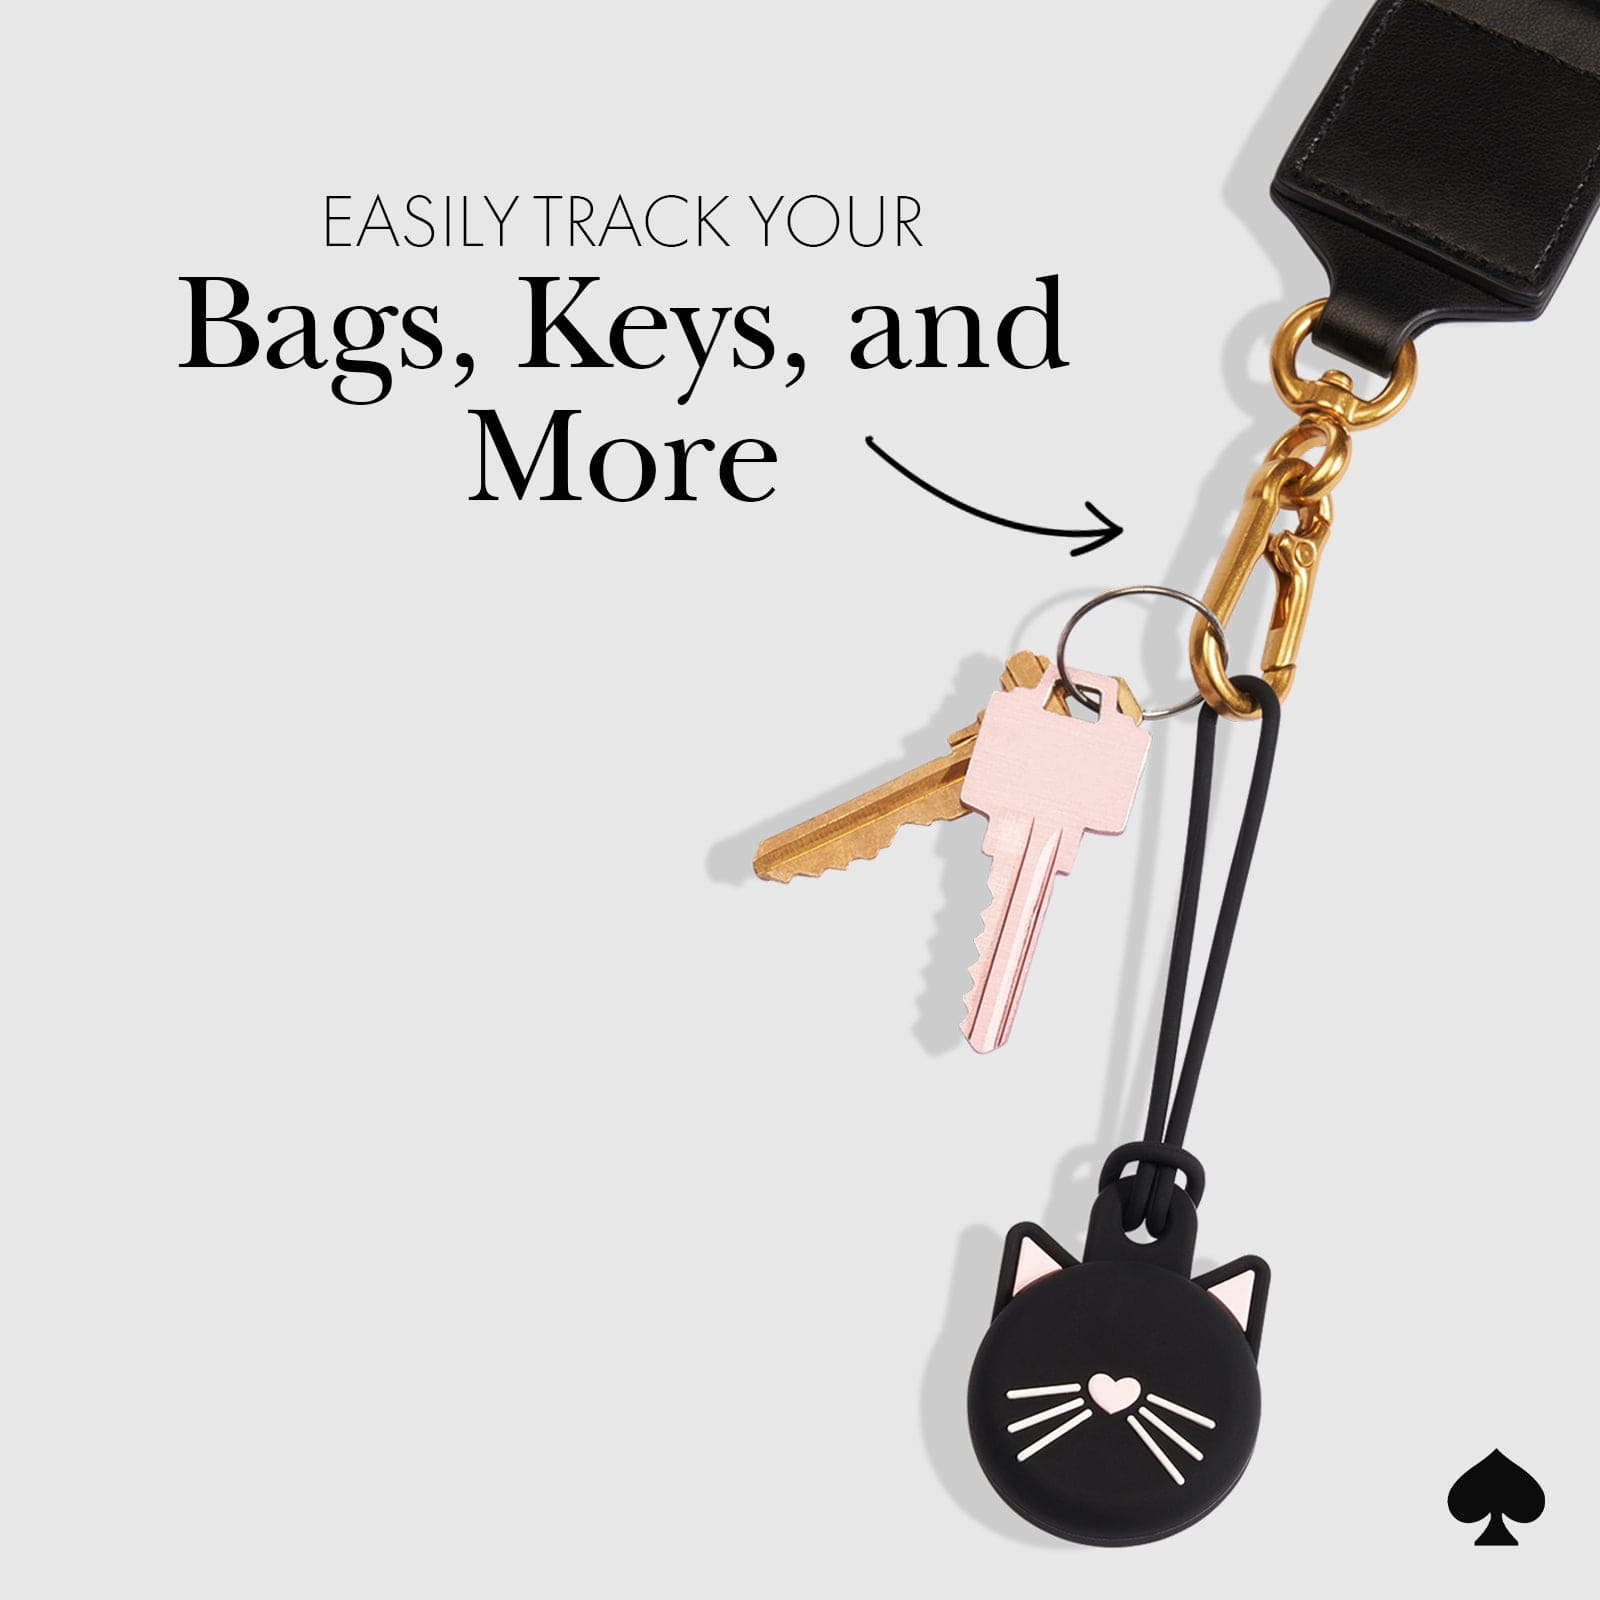 EASILY TRACK YOUR BAGS, KEYS, AND MORE!